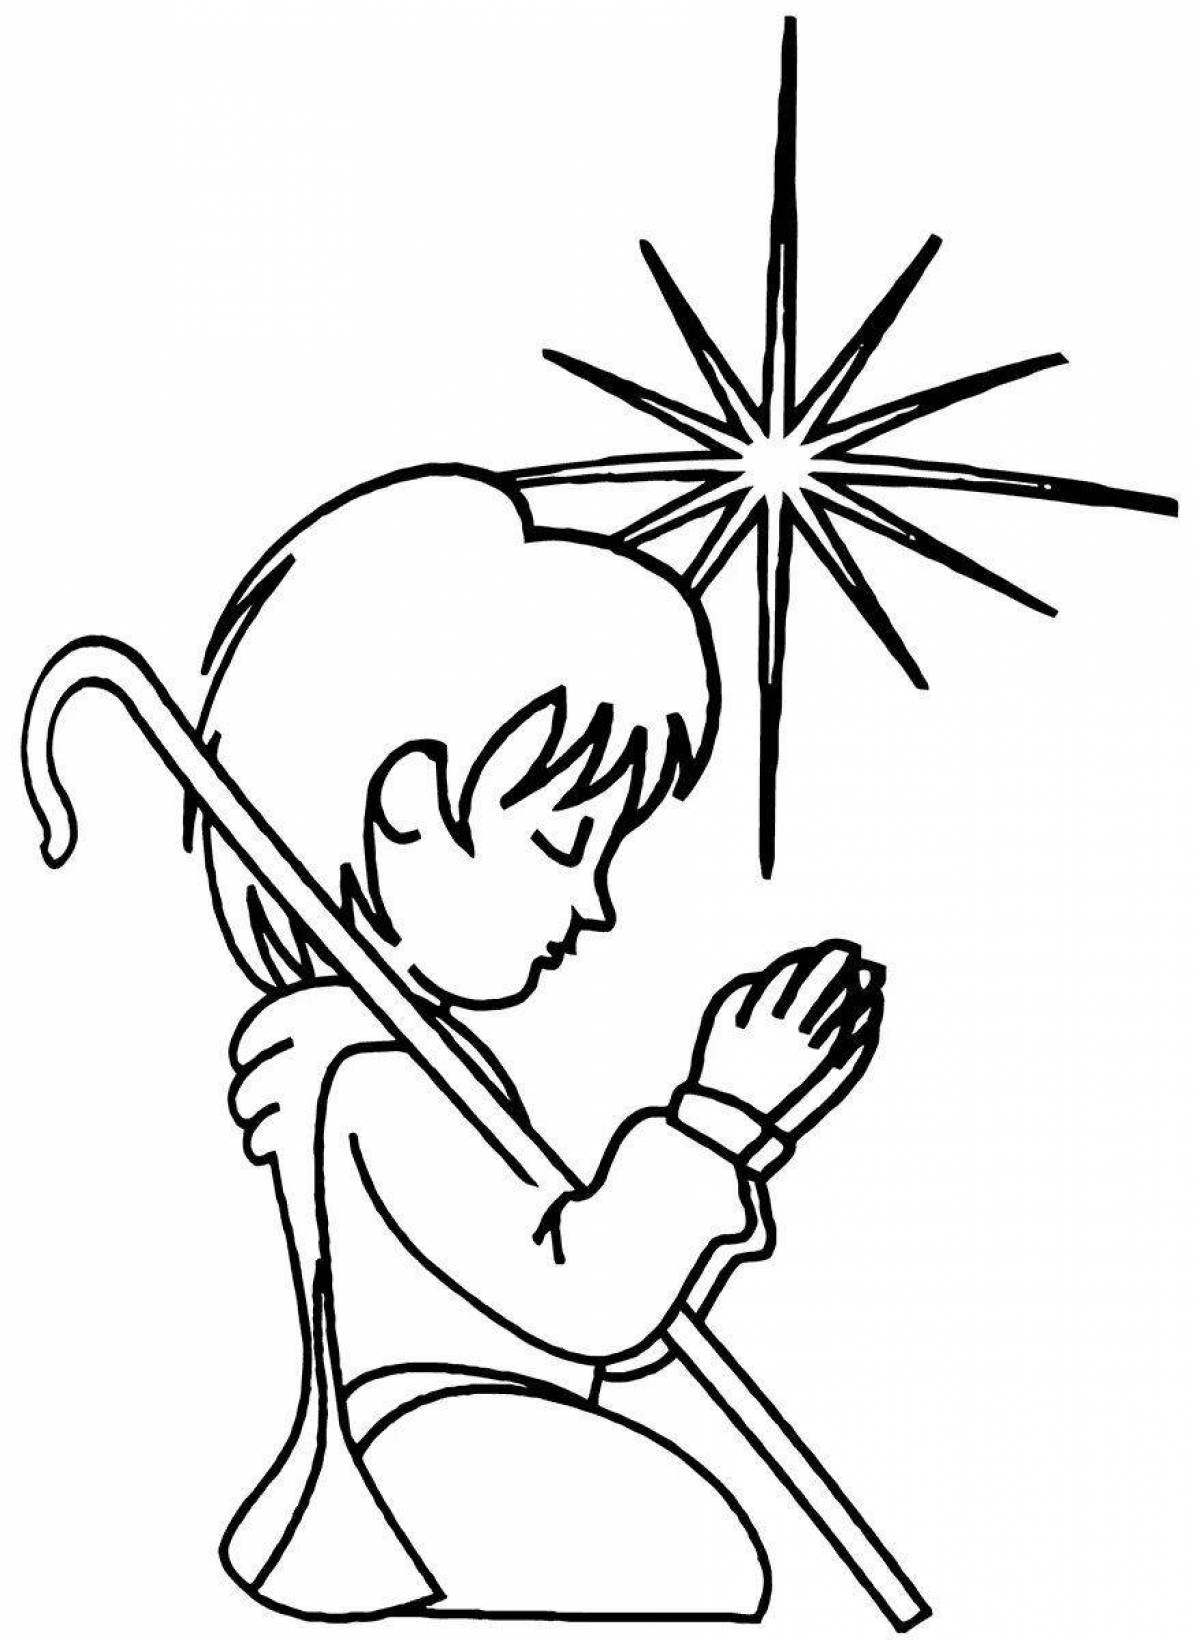 Magic star of bethlehem coloring pages for kids